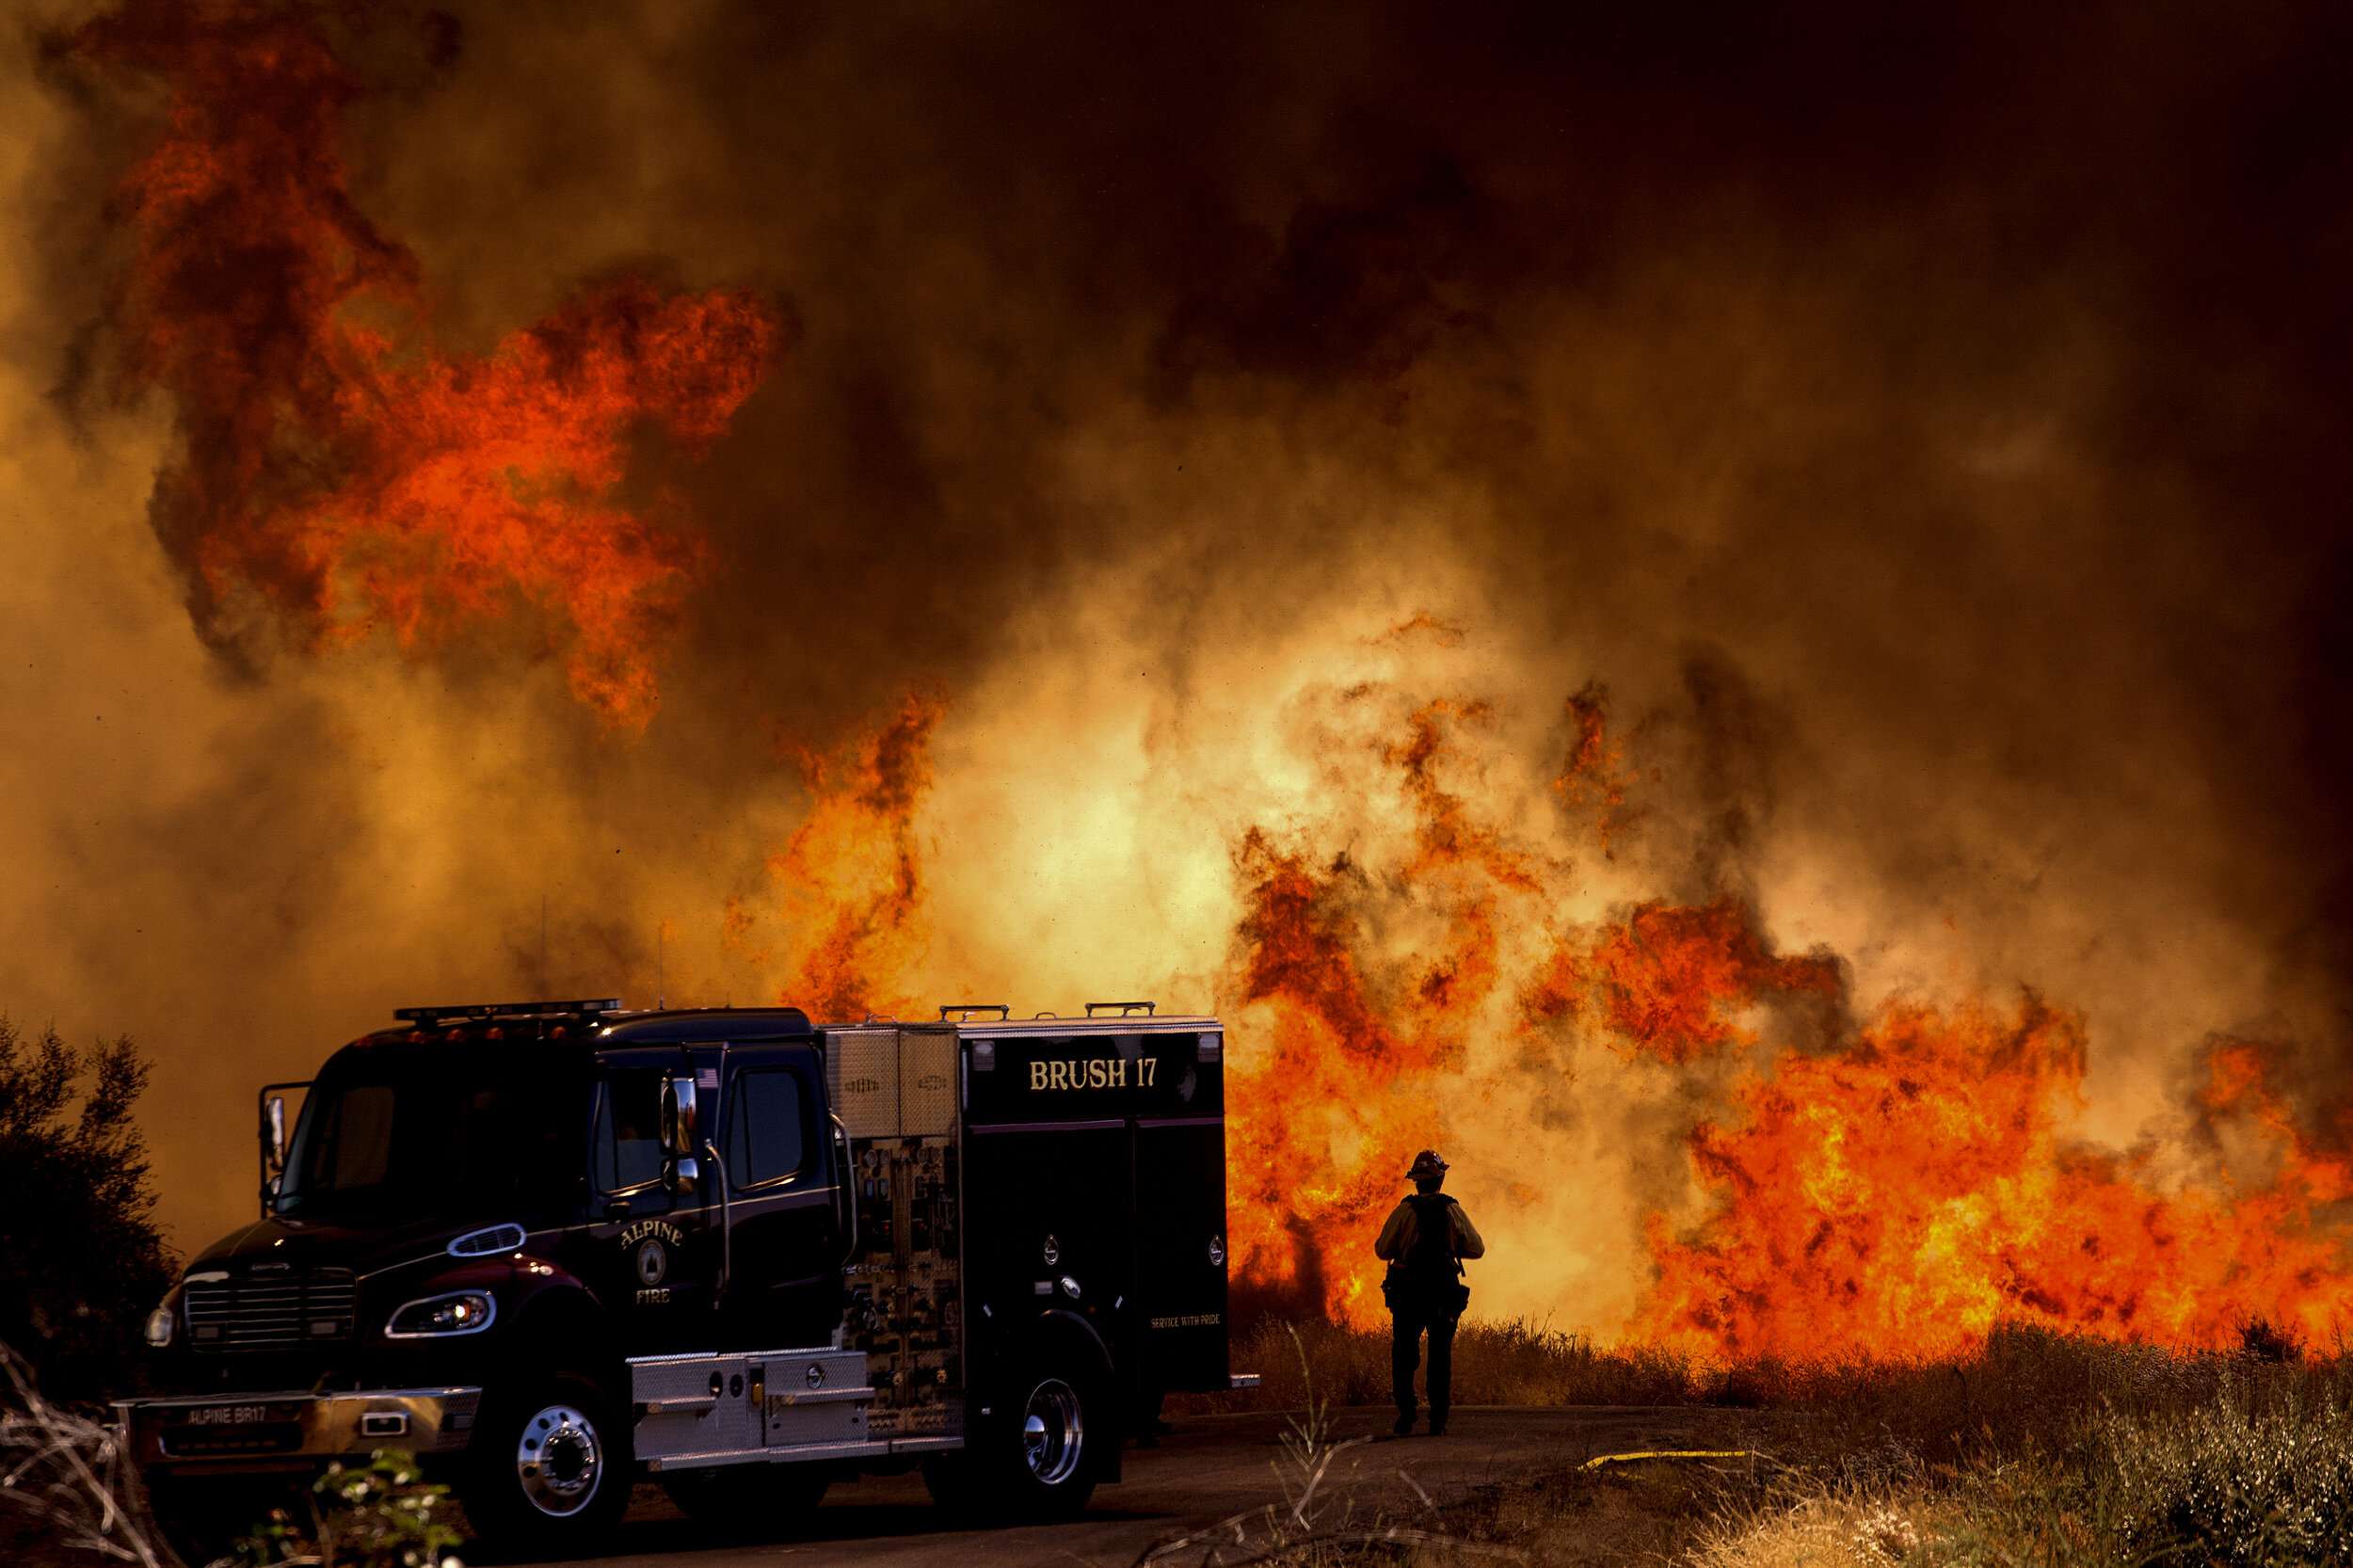  A firefighter stands next to a fire truck as flames from a brush fire flare at the Apple Fire in Cherry Valley, Calif., Saturday, Aug. 1, 2020. The 2020 California wildfire season was characterized by a record-setting year of wildfires that burned a